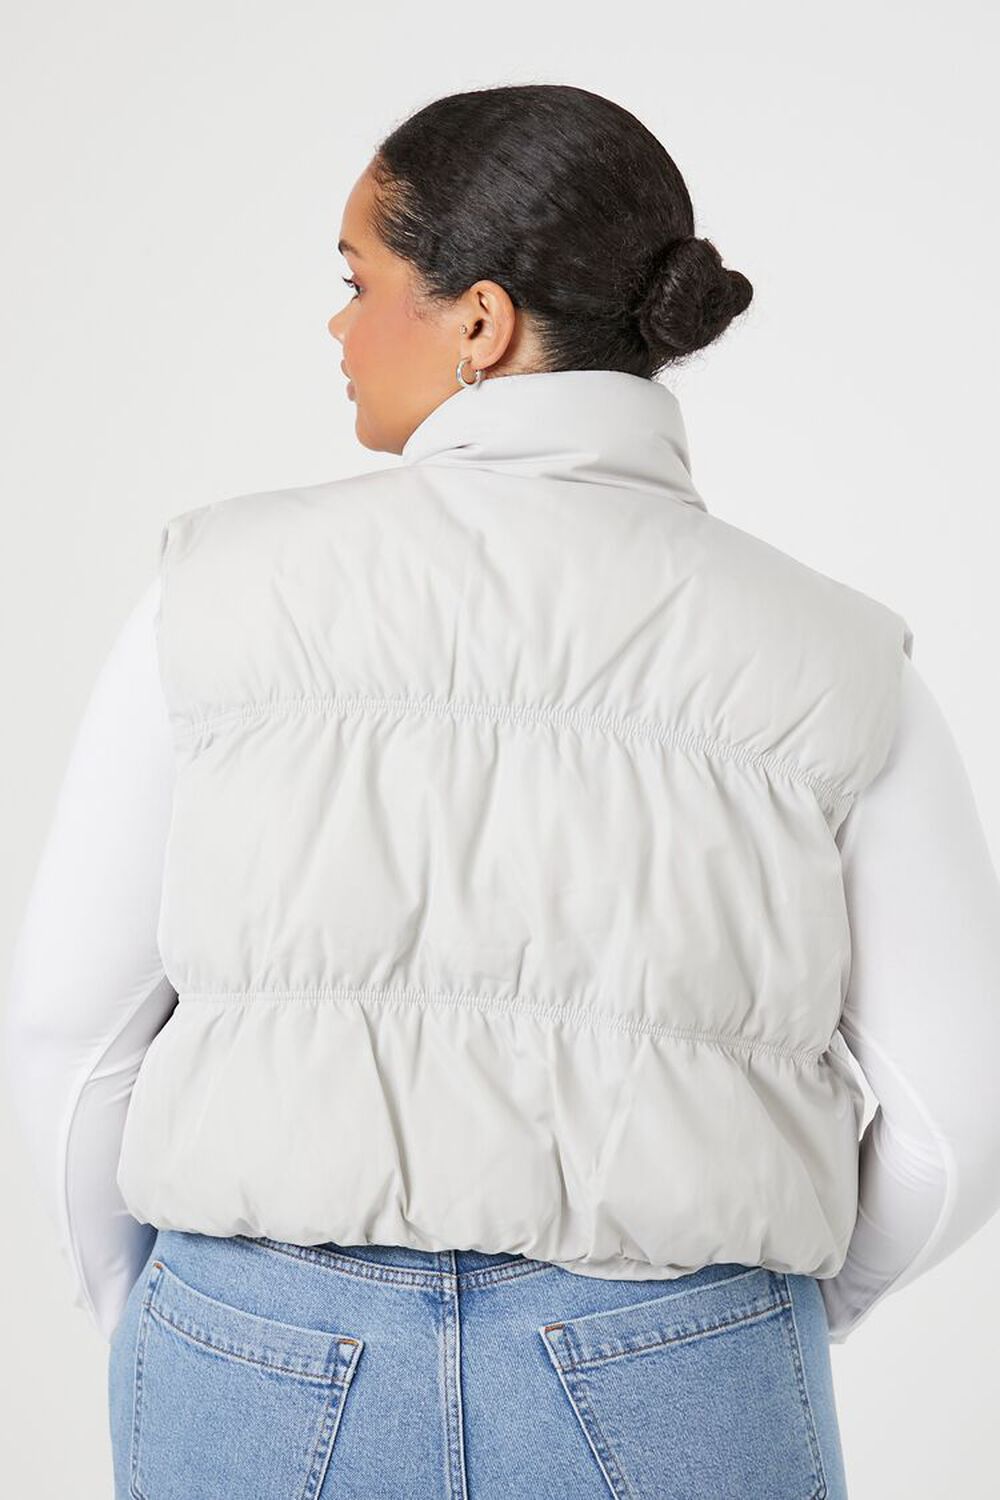 SILVER Plus Size Quilted Puffer Vest, image 3